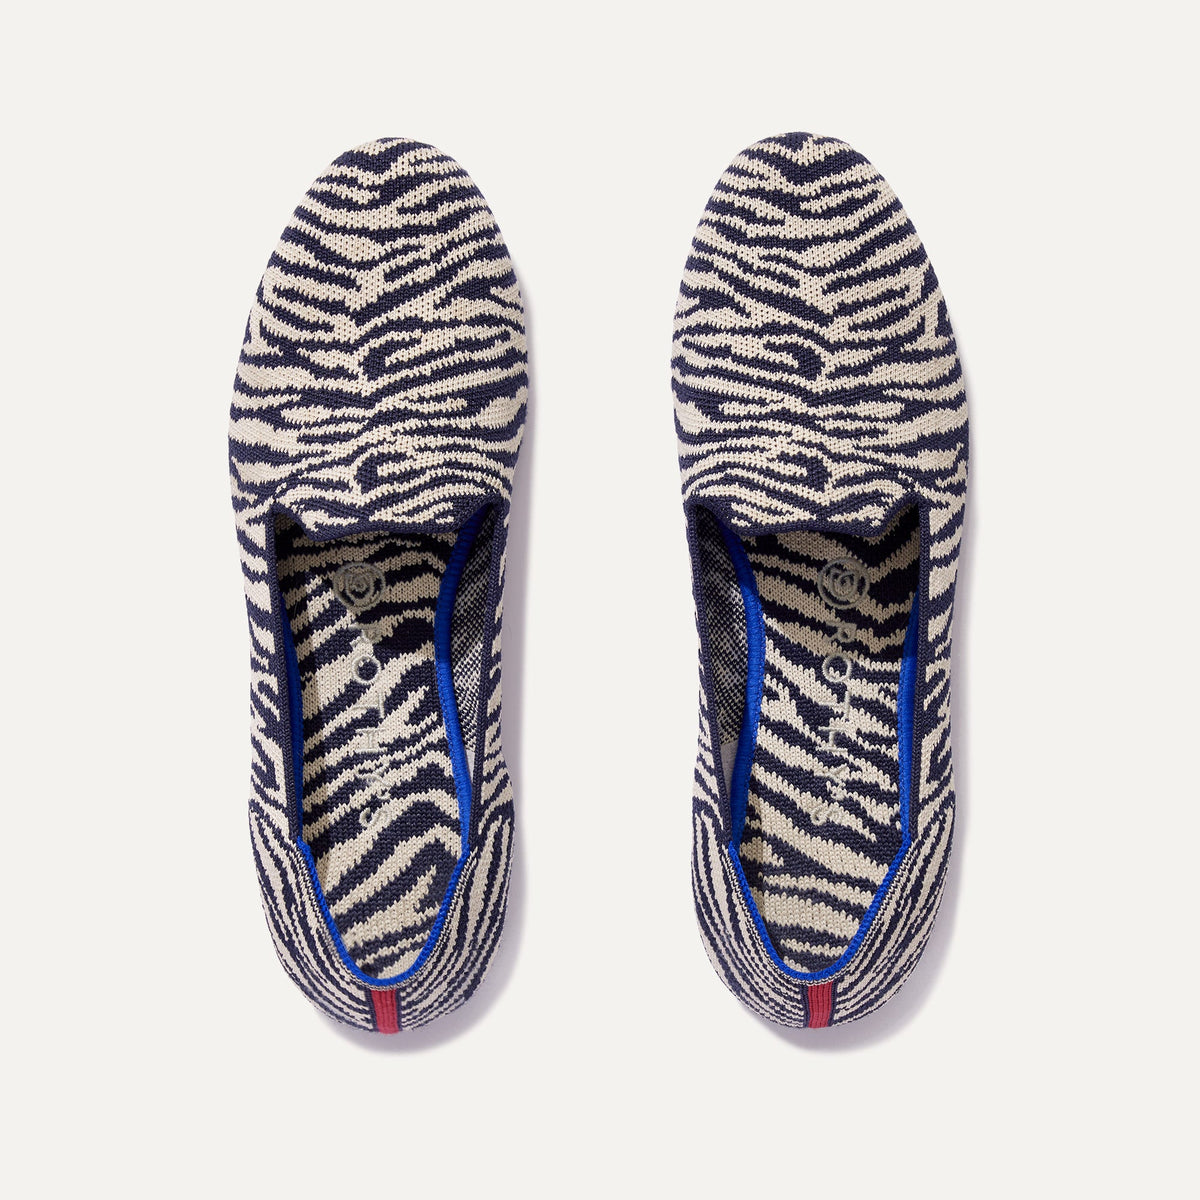 The Loafer in Navy Zebra | Women's Shoes | Rothy's